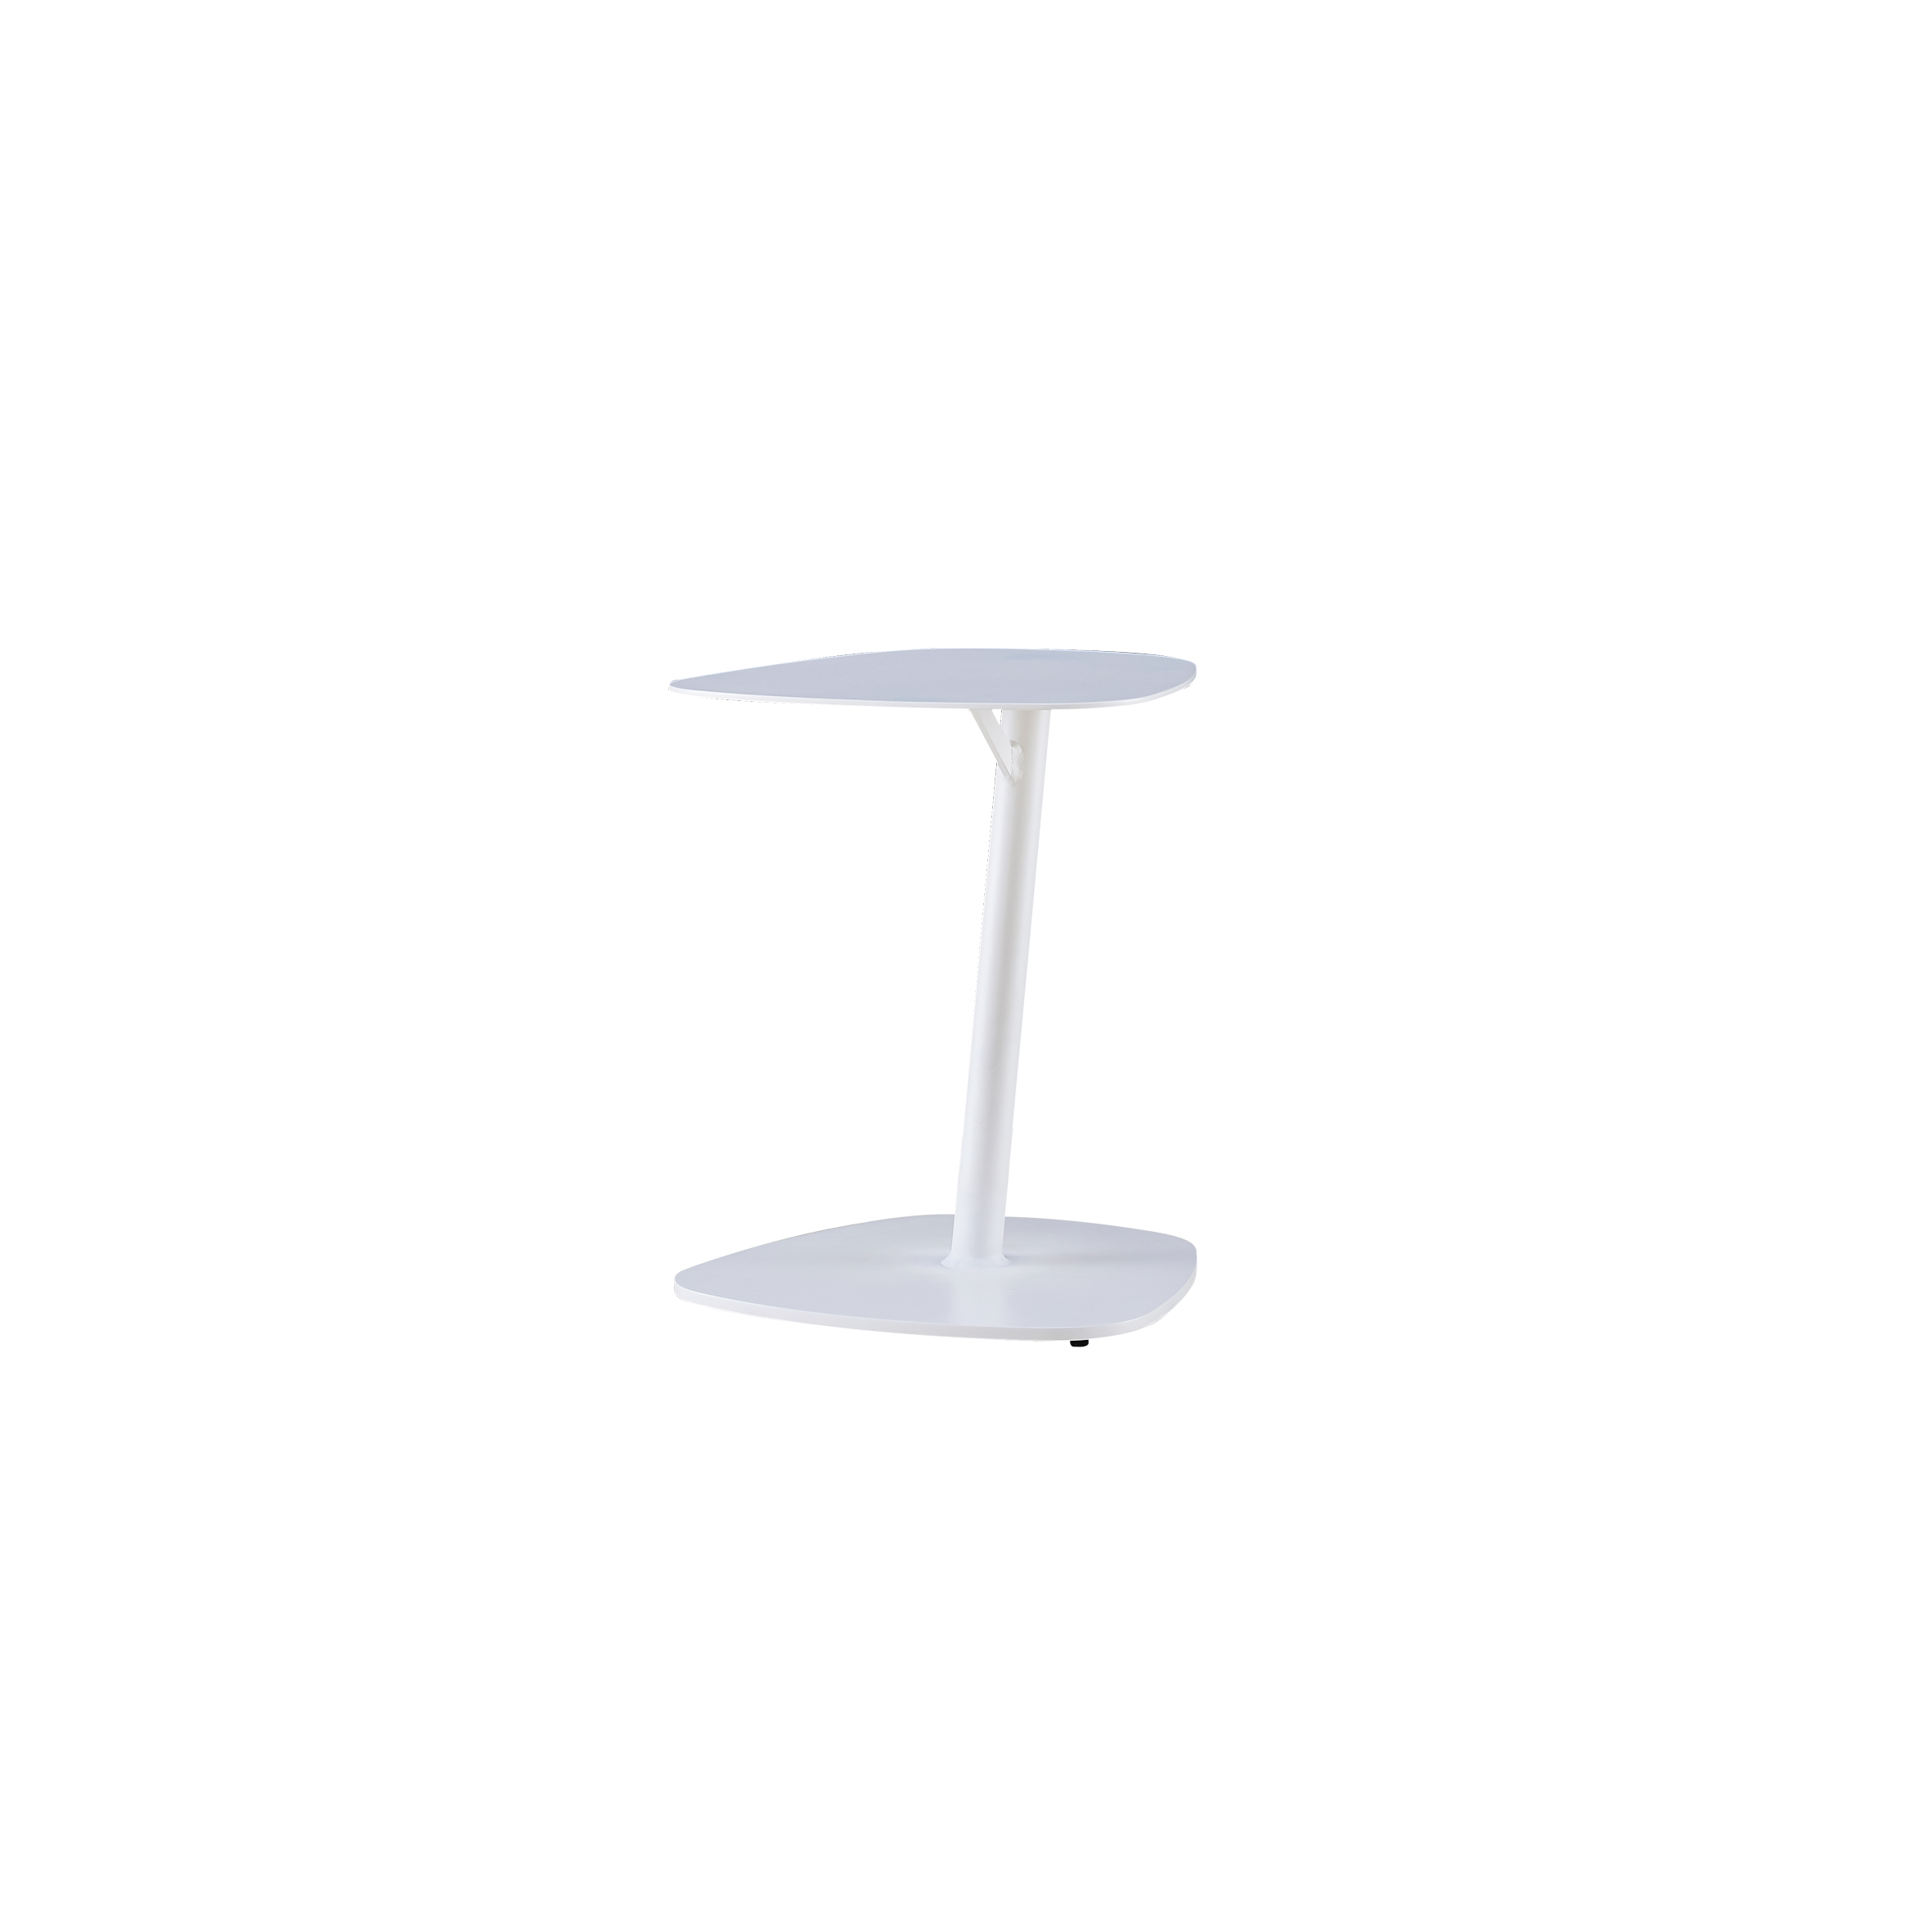 Golf alu. side table Featured Image